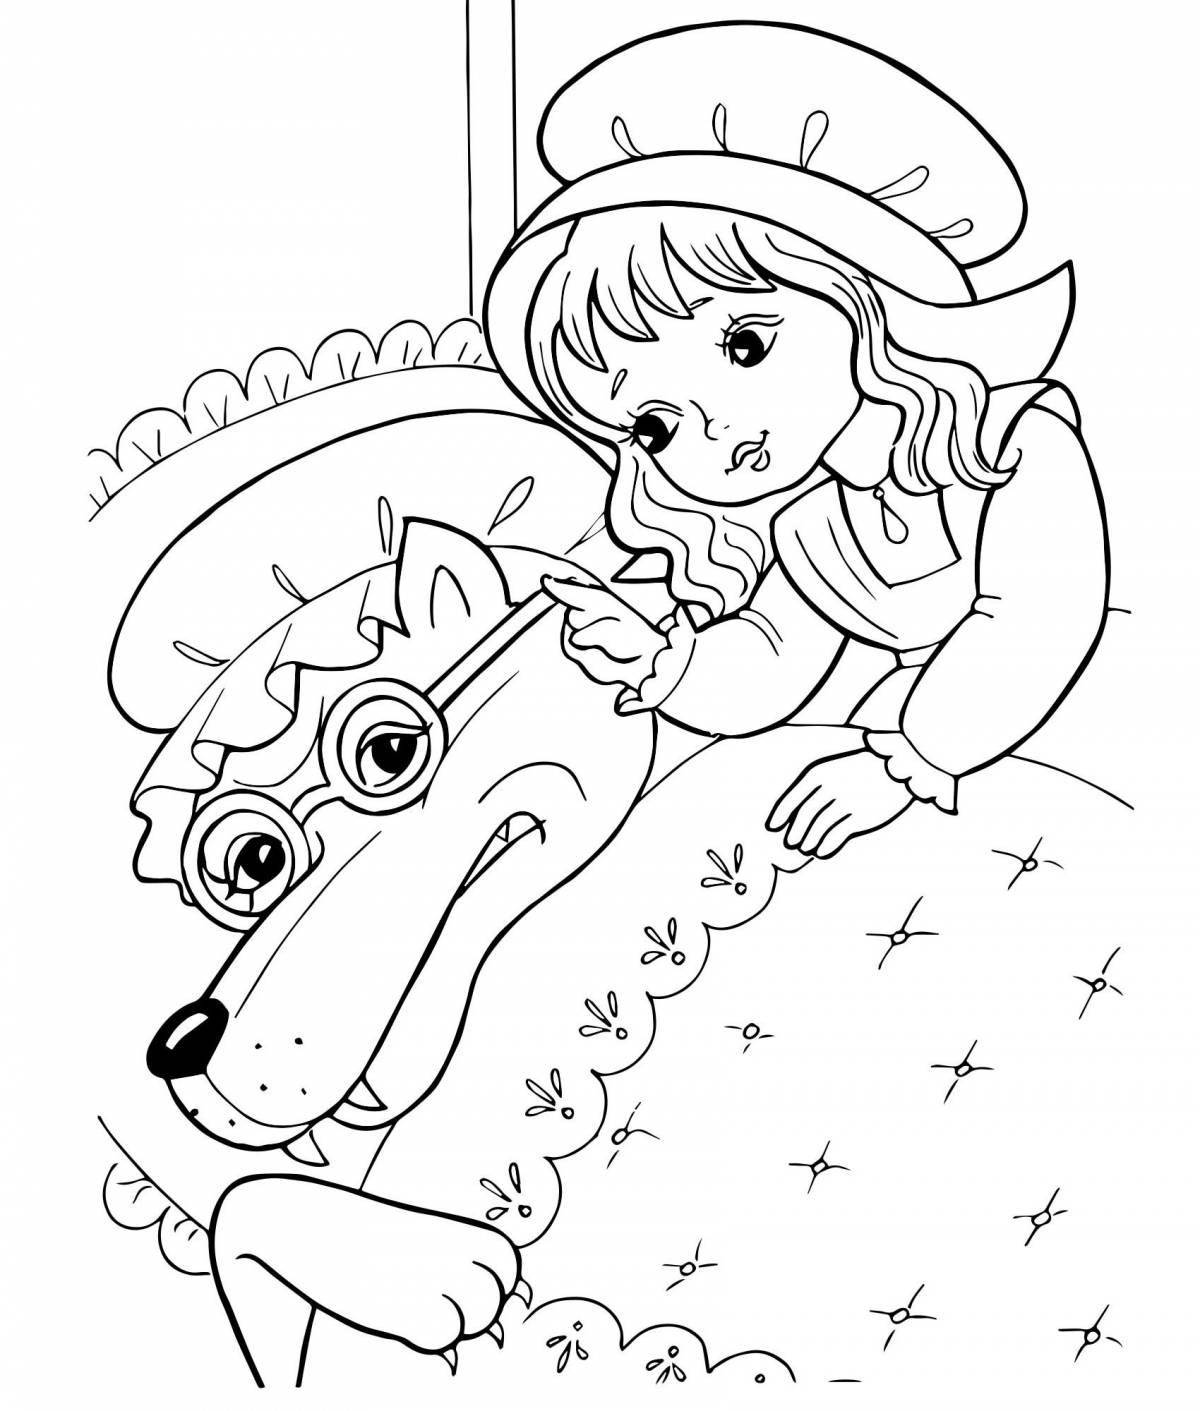 Amazing coloring page illustration